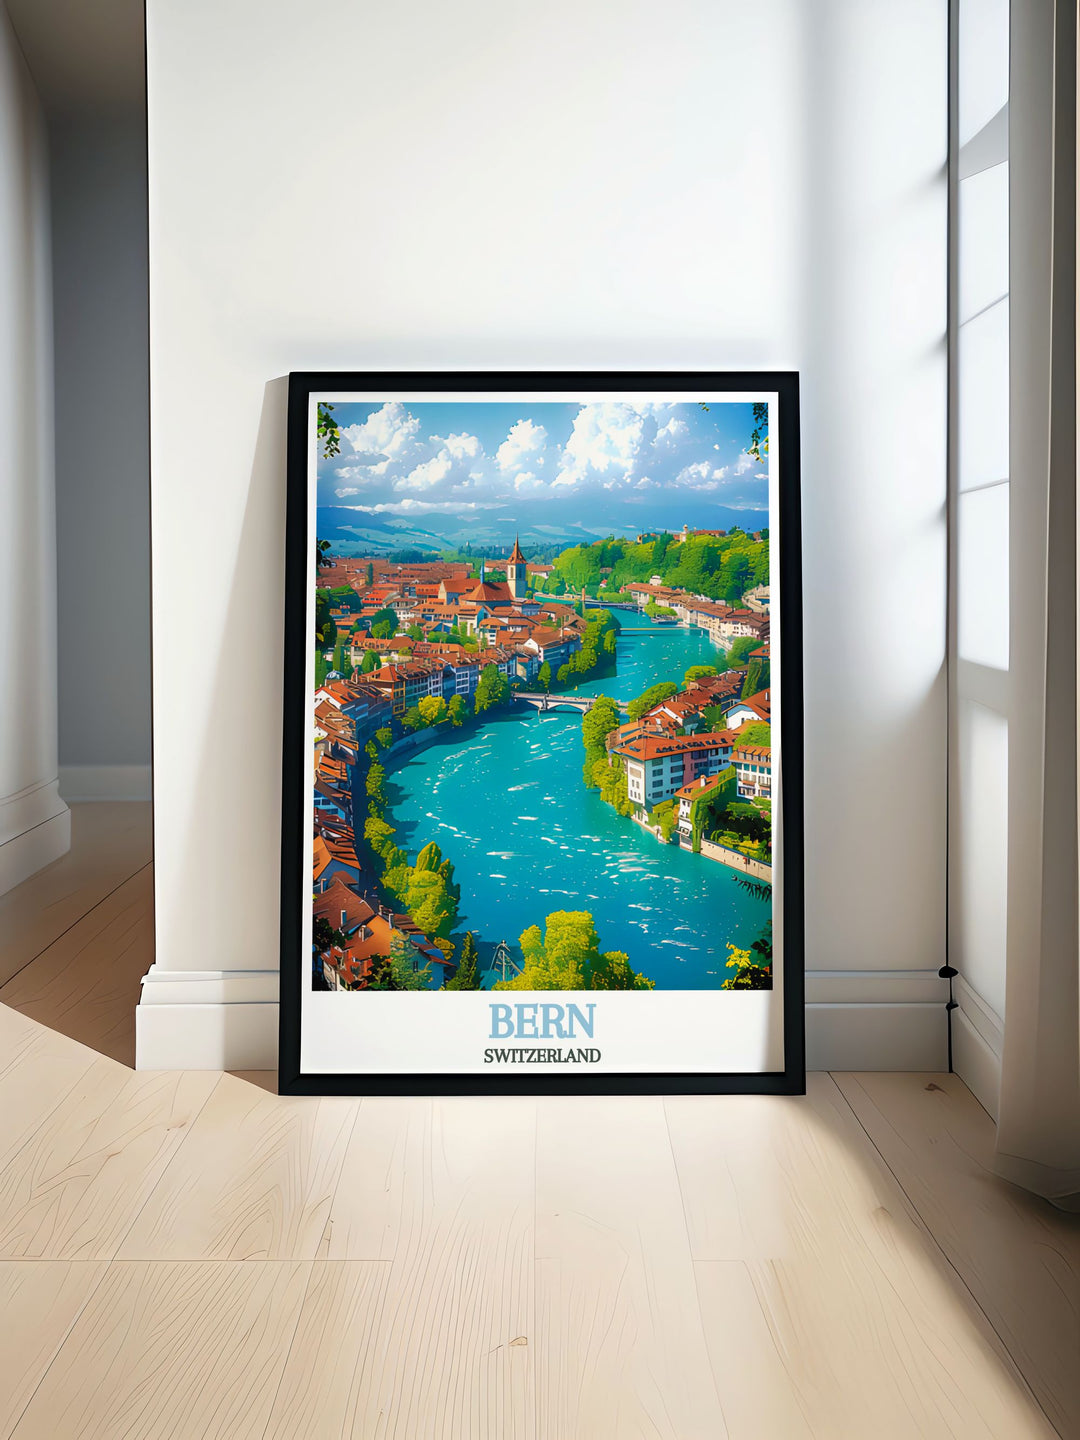 Berns vibrant cityscape and the serene flow of the Aare River are illustrated in this travel poster, offering a perfect blend of urban beauty and natural tranquility.